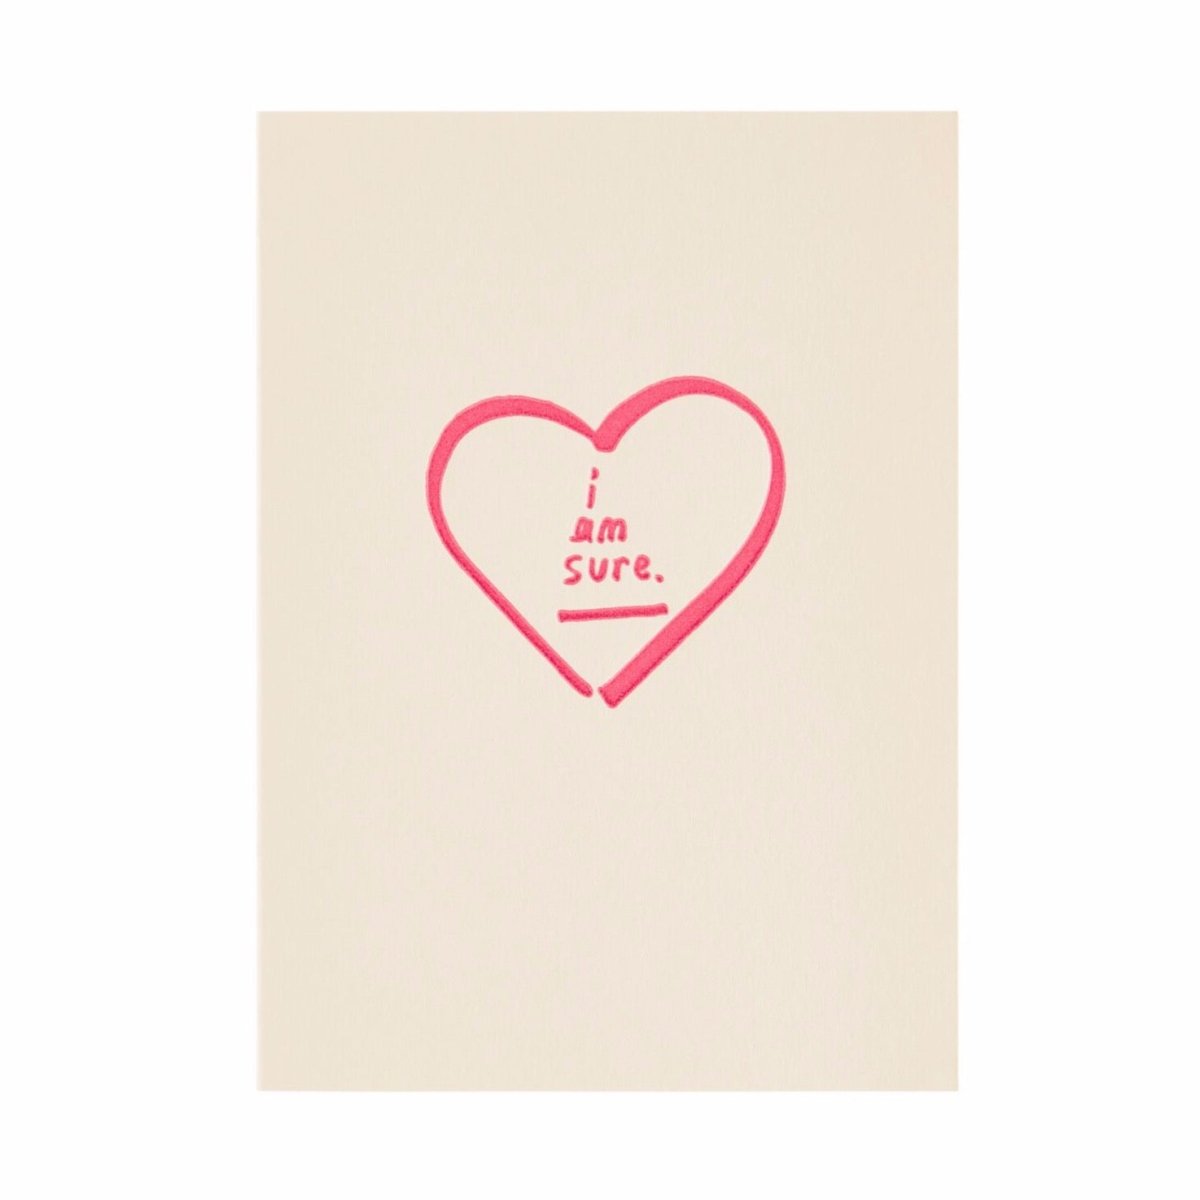 Letterpress printed greeting card reads "I AM SURE" surrounded by a pink heart. Card comes with a blue envelope. Printed in Oakland, California by People I've Loved.